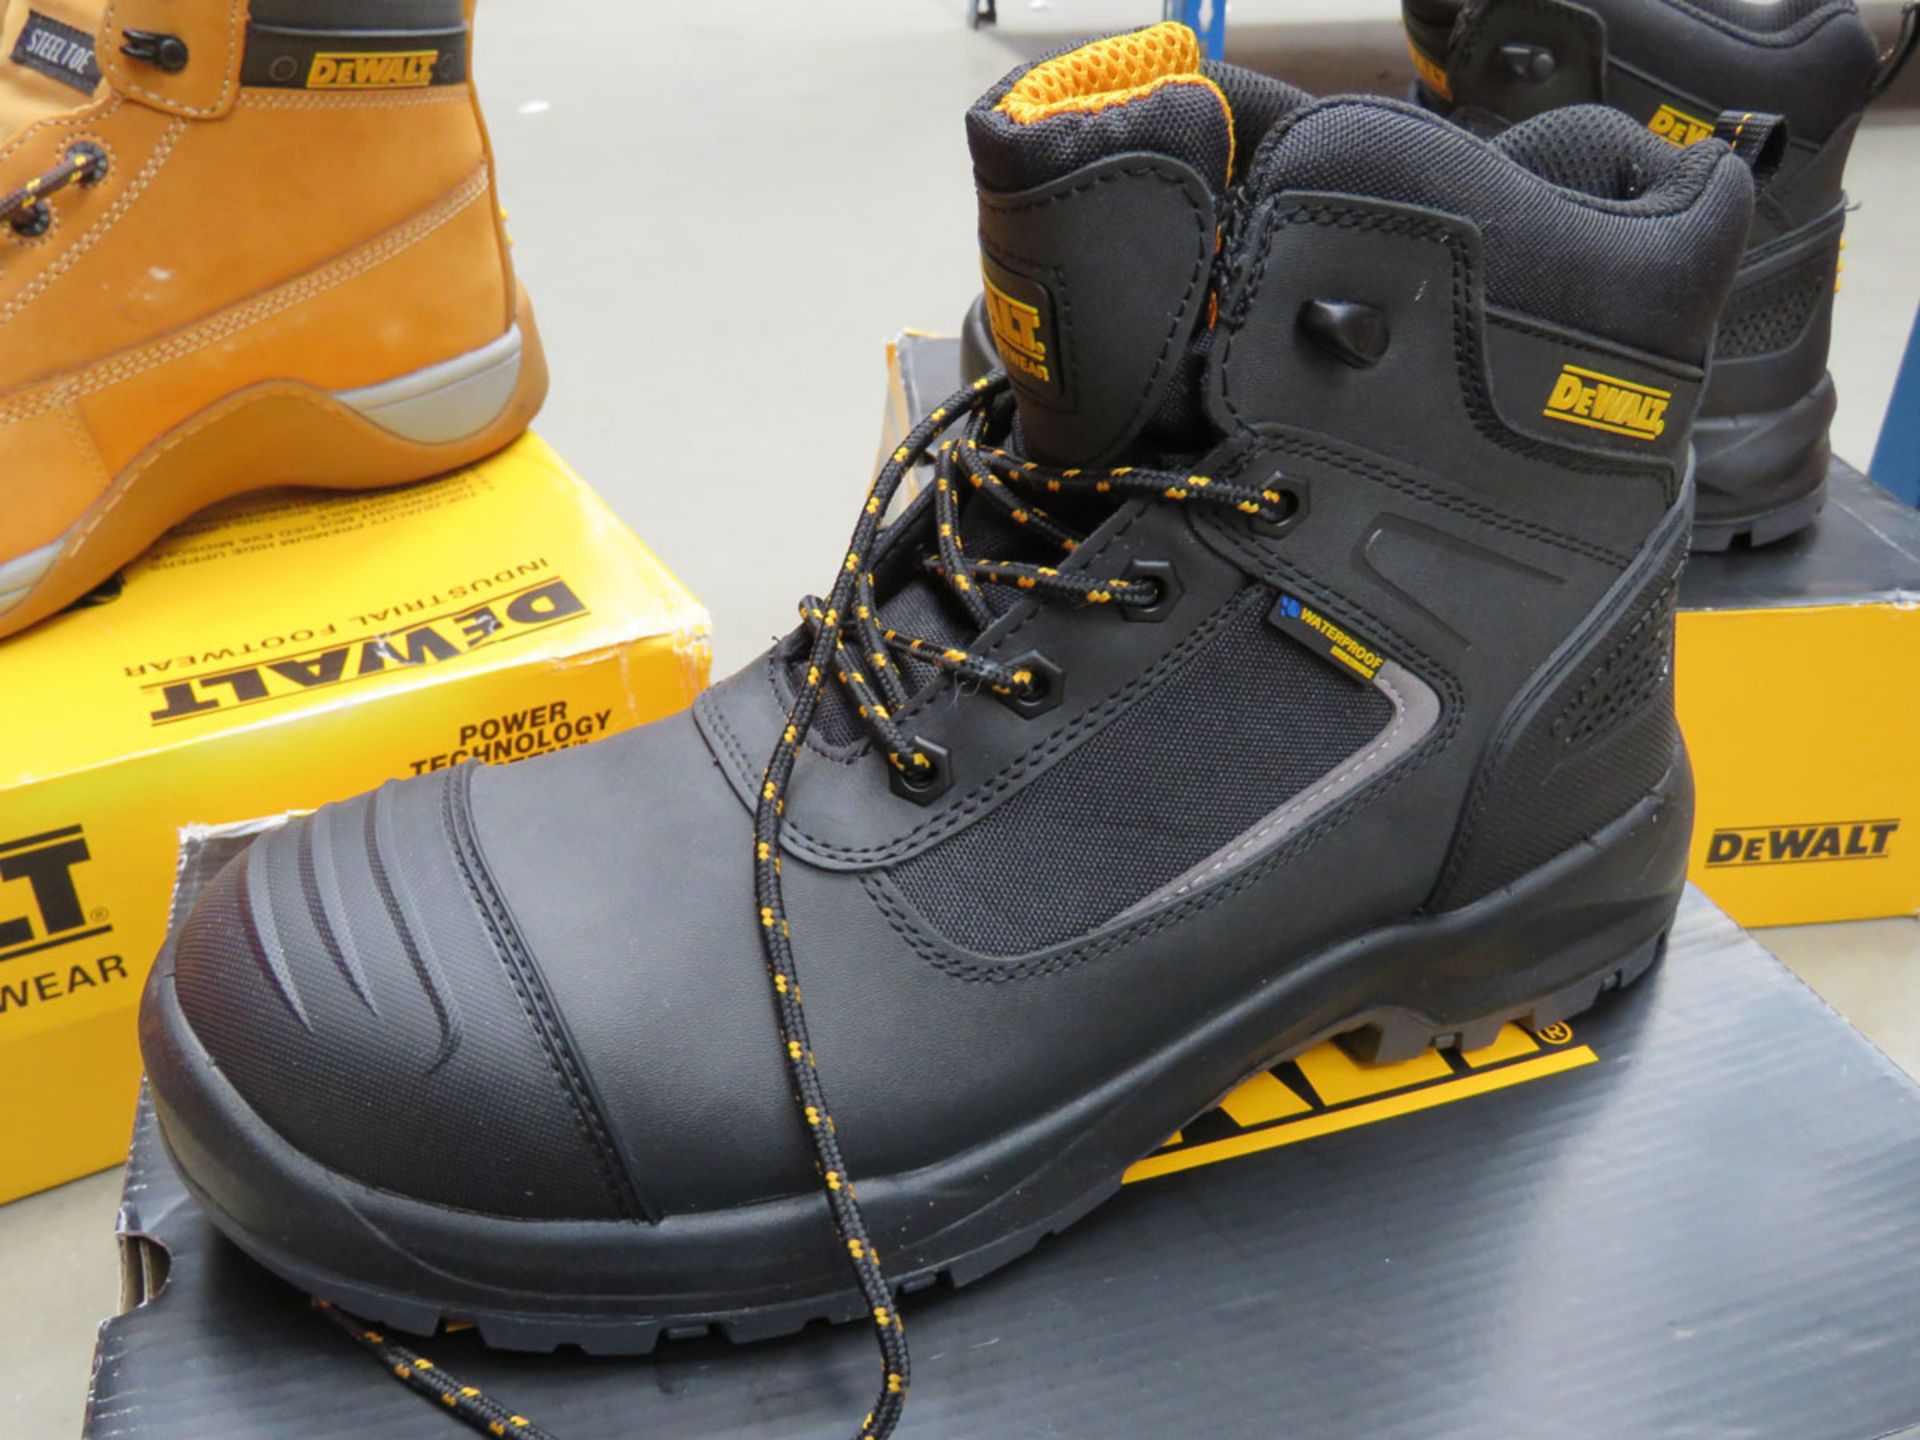 3 boxed pairs of DeWalt safety boots 2 x size 10, 1 x size 12 - Image 2 of 3